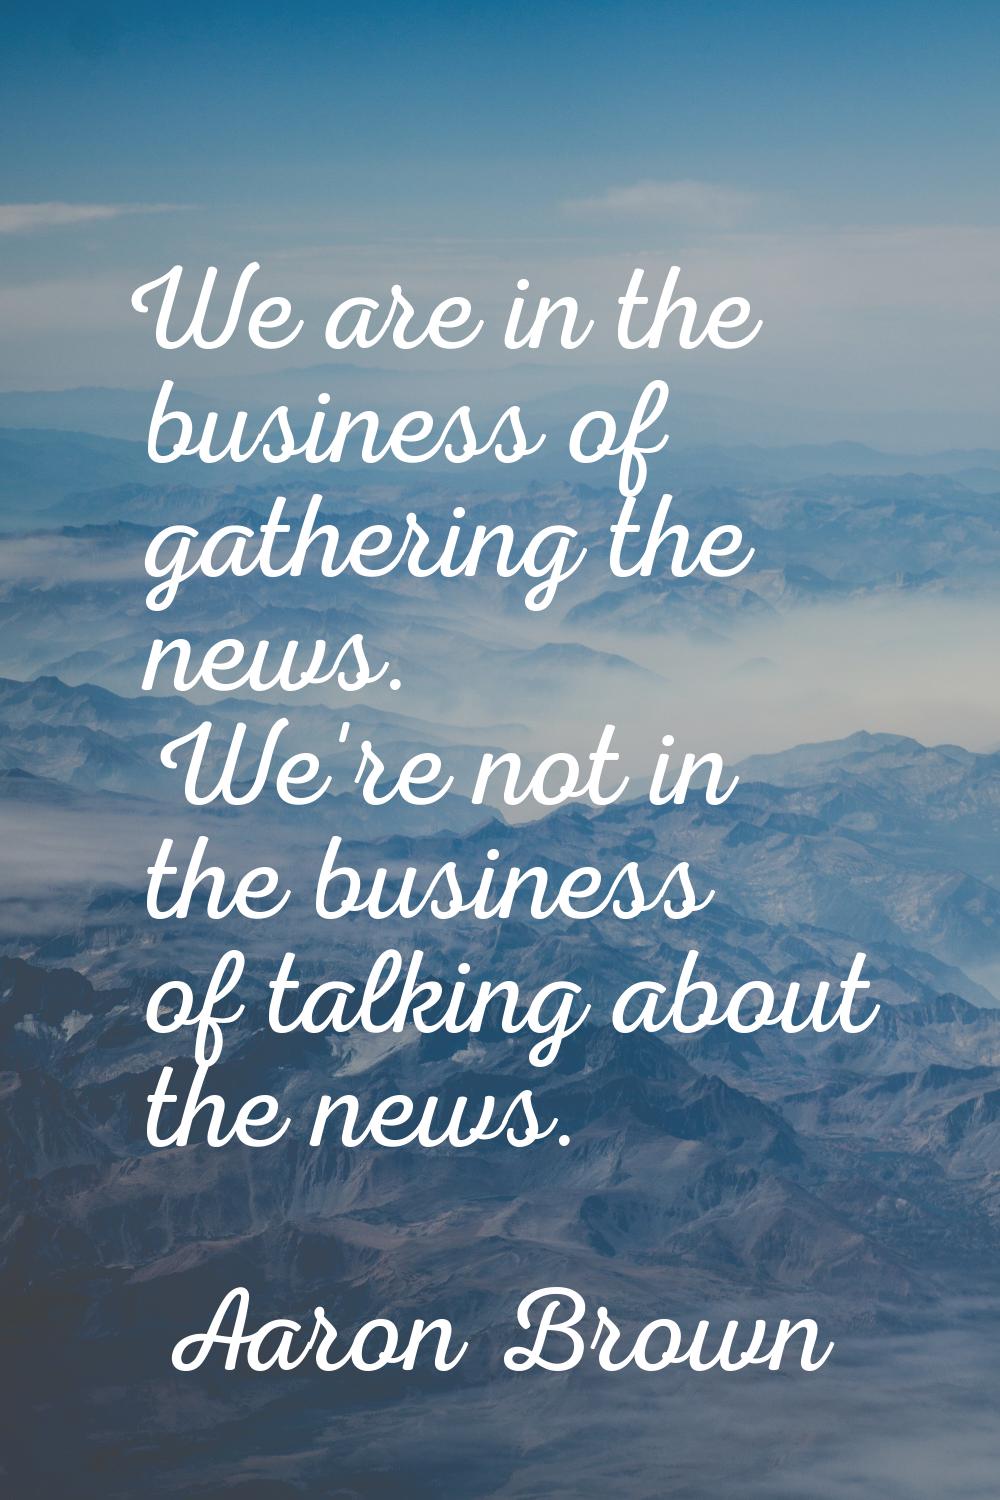 We are in the business of gathering the news. We're not in the business of talking about the news.